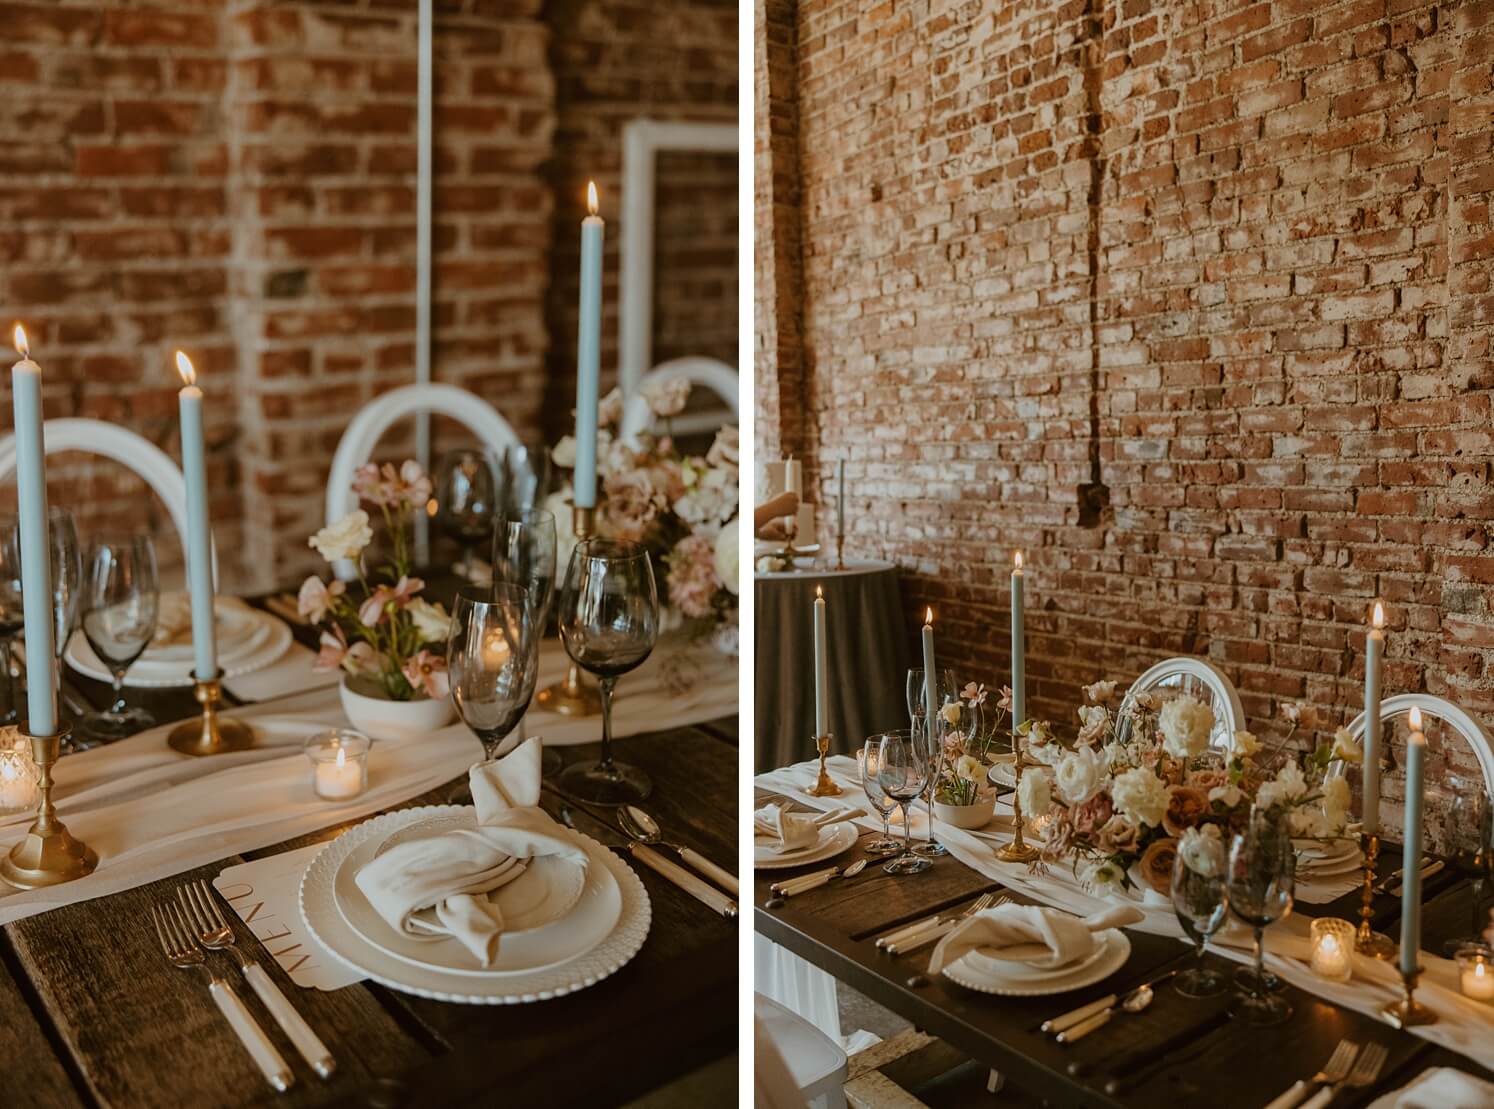 Light pink flowers with pale blue candles and white place settings | Romantic wedding table decor against brick wall | McArthur Weddings and Events